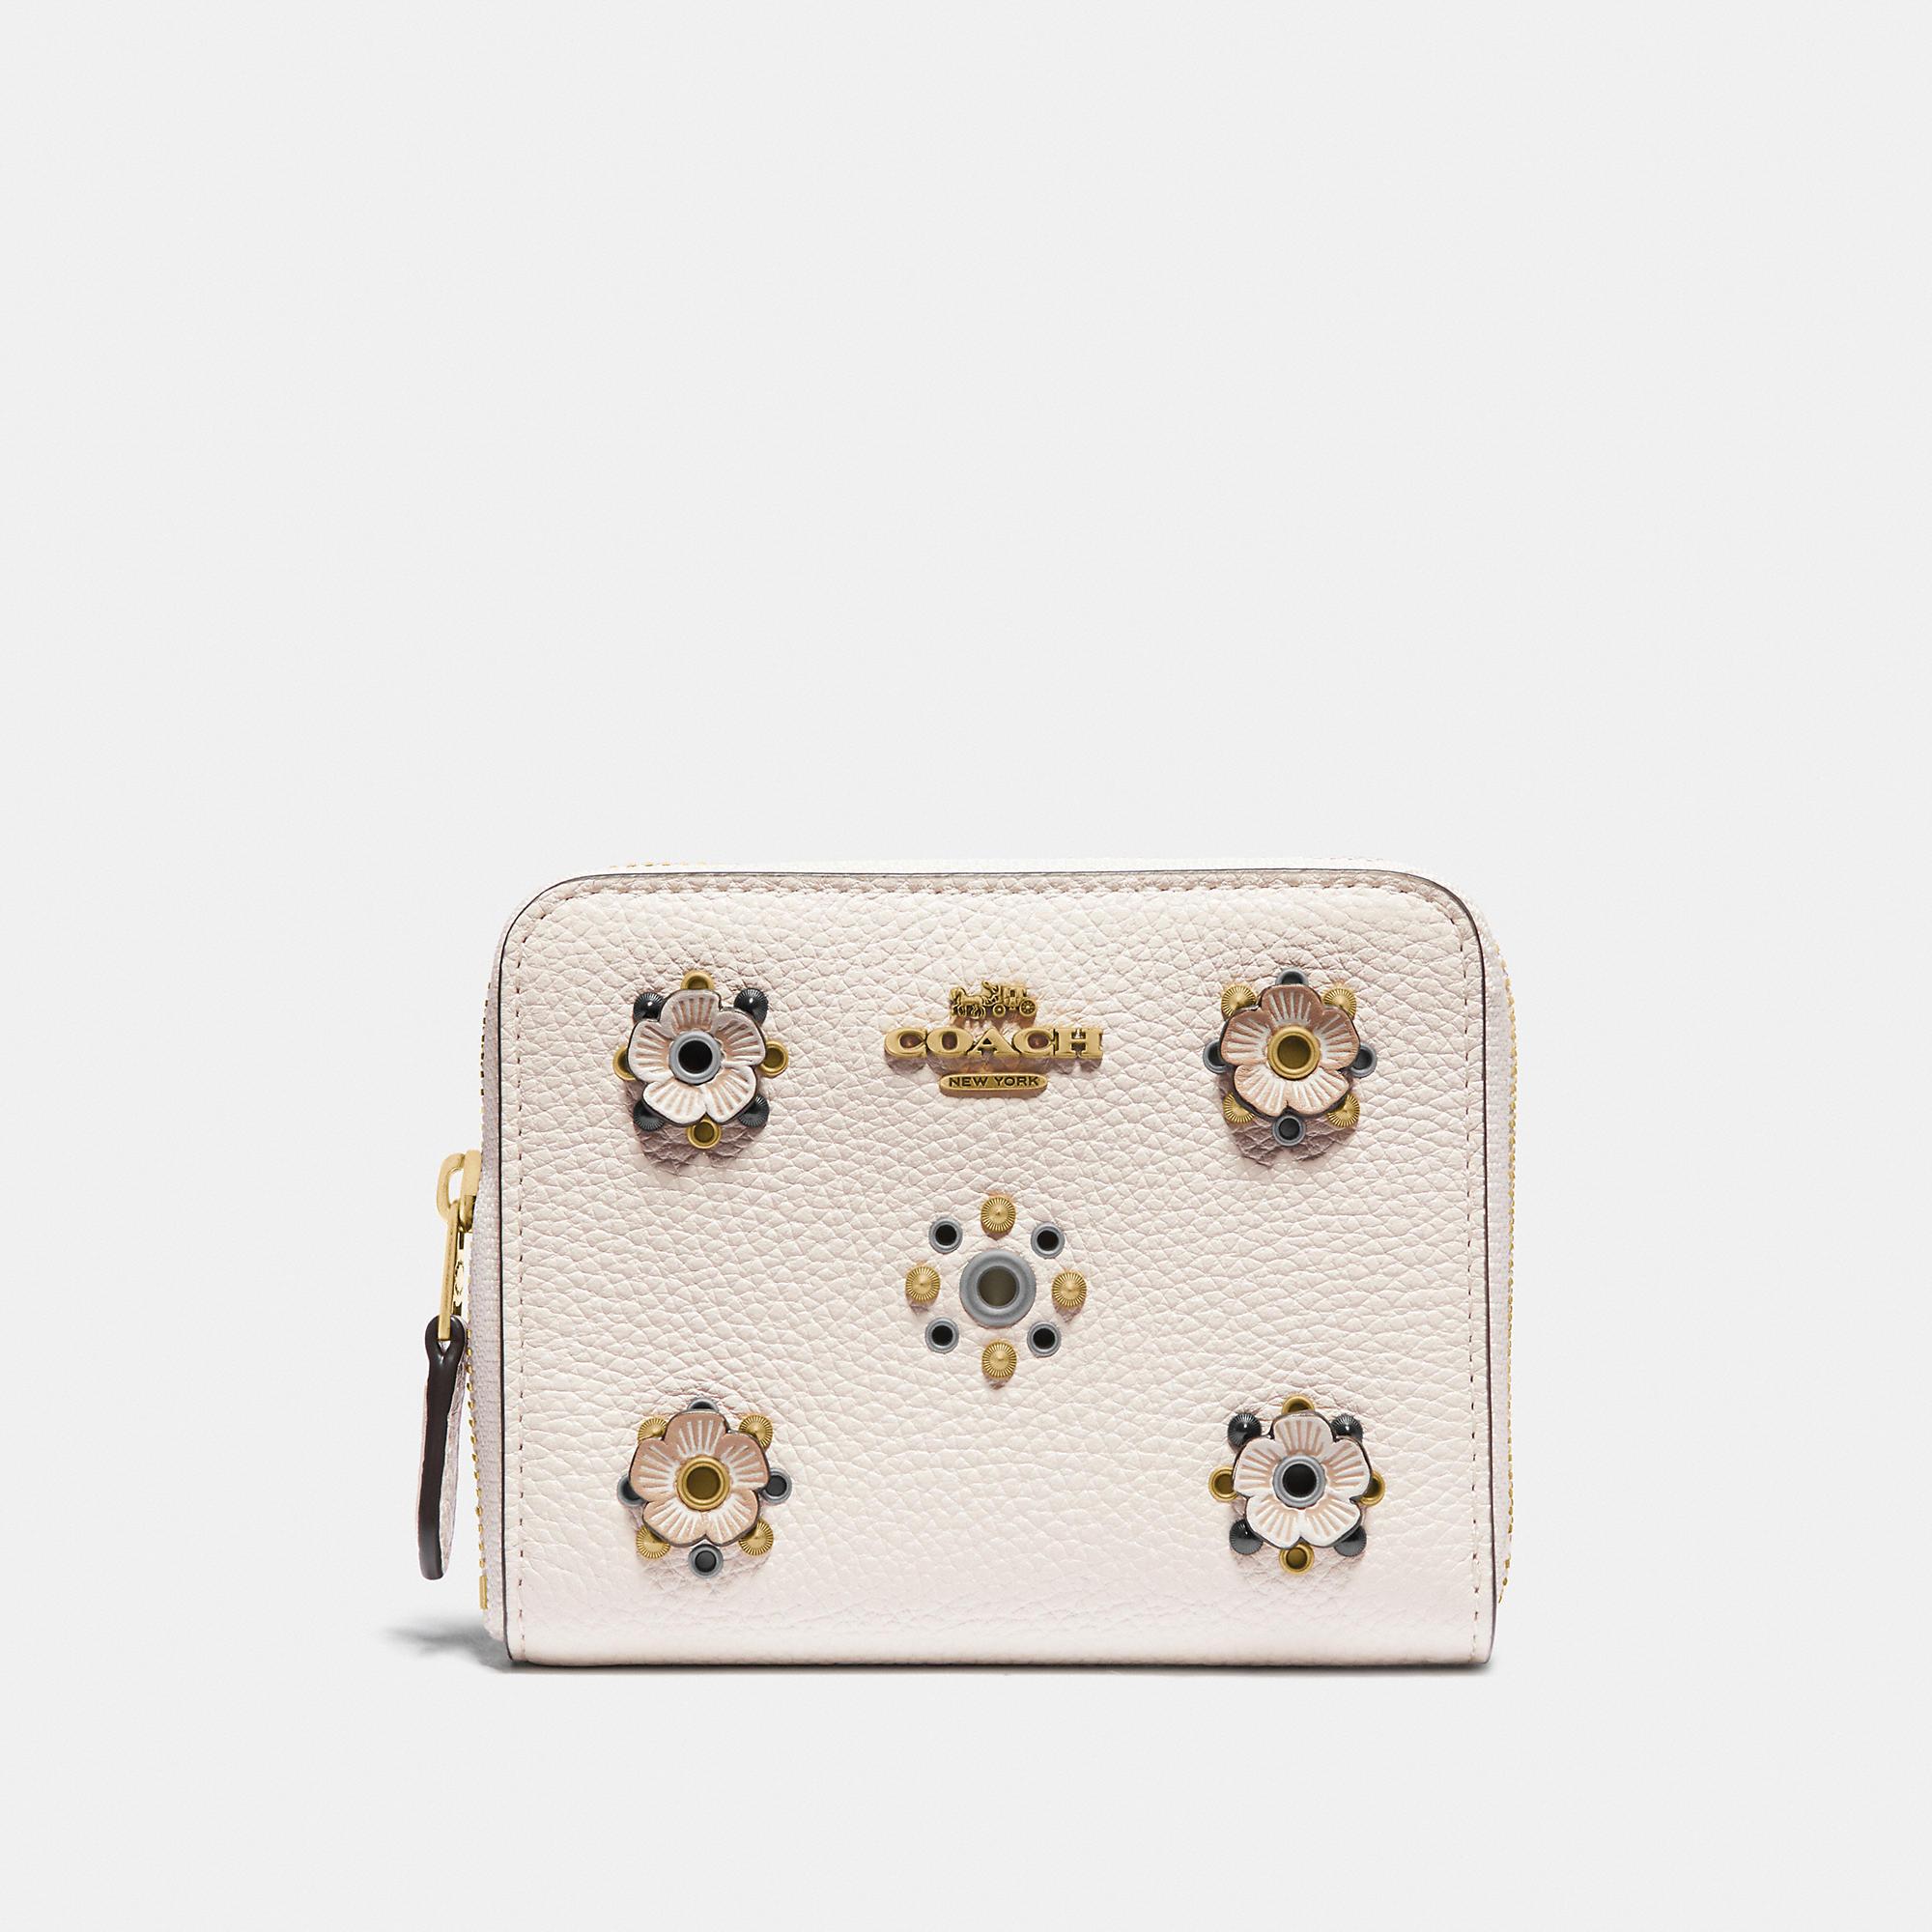 COACH Small Zip Around Wallet With Scattered Rivets in Natural - Lyst